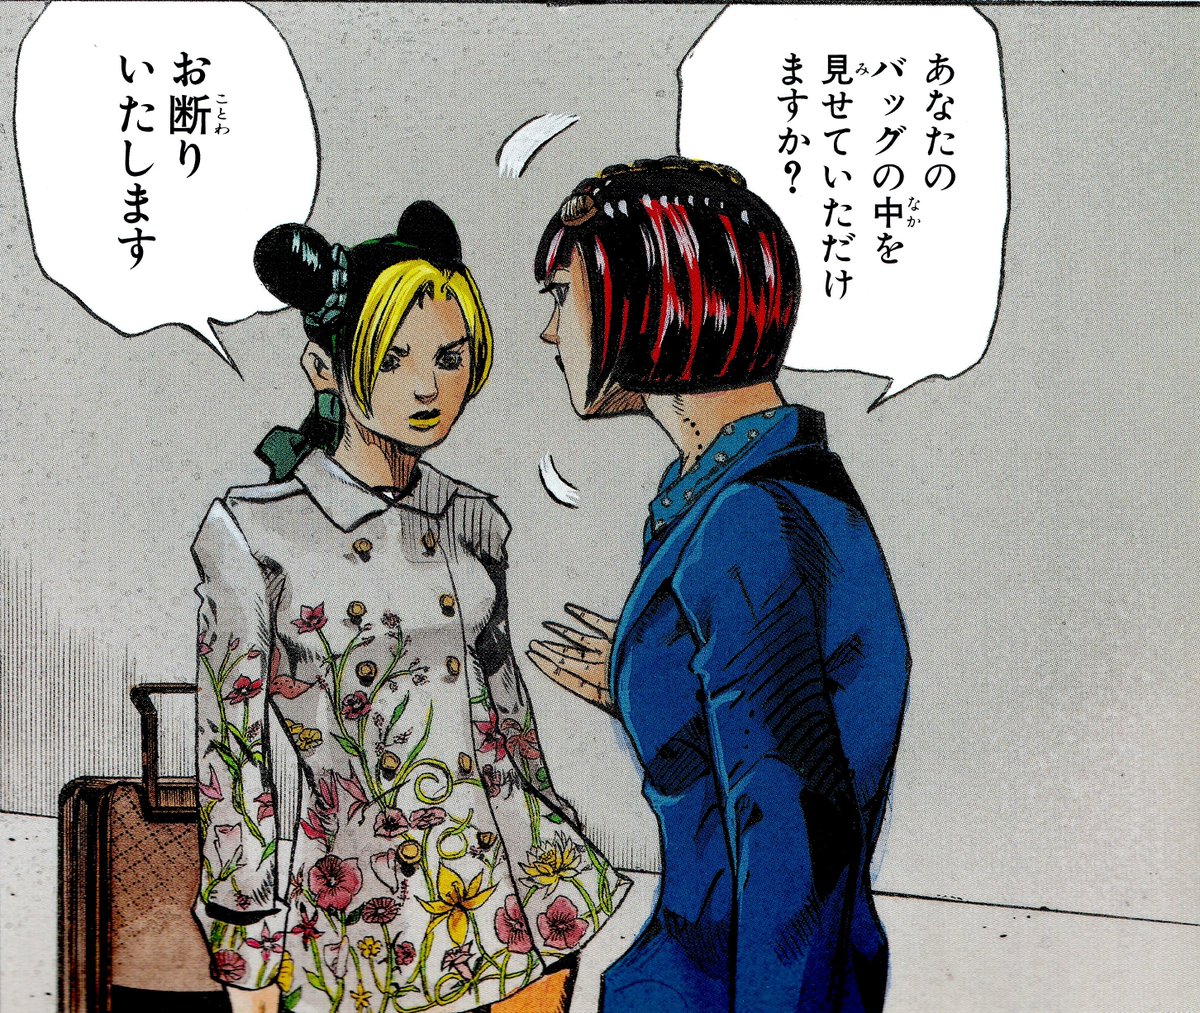 Aug 11, 2020 in Twitter Tweet: Jolyne, Fly High With GUCCI ! 